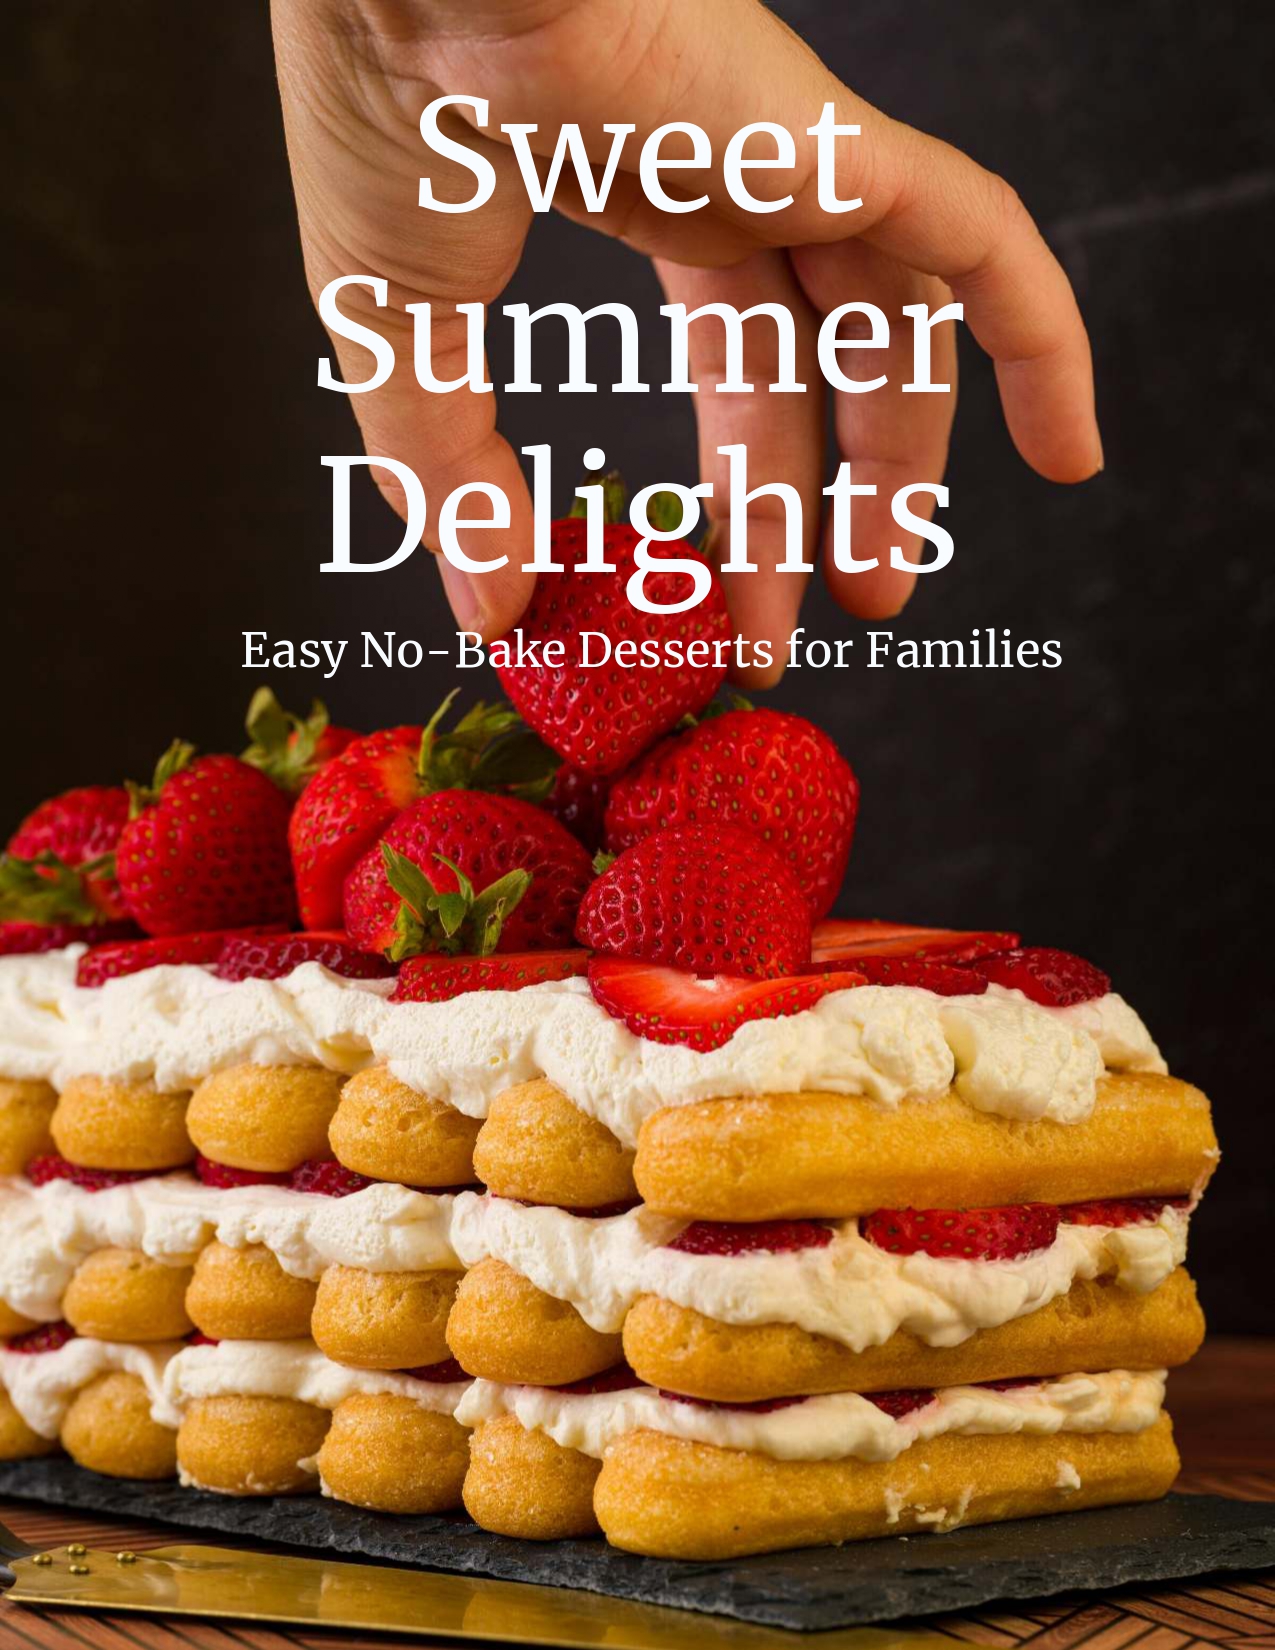 Sweet Summer Delights: Easy No-Bake Desserts for Families